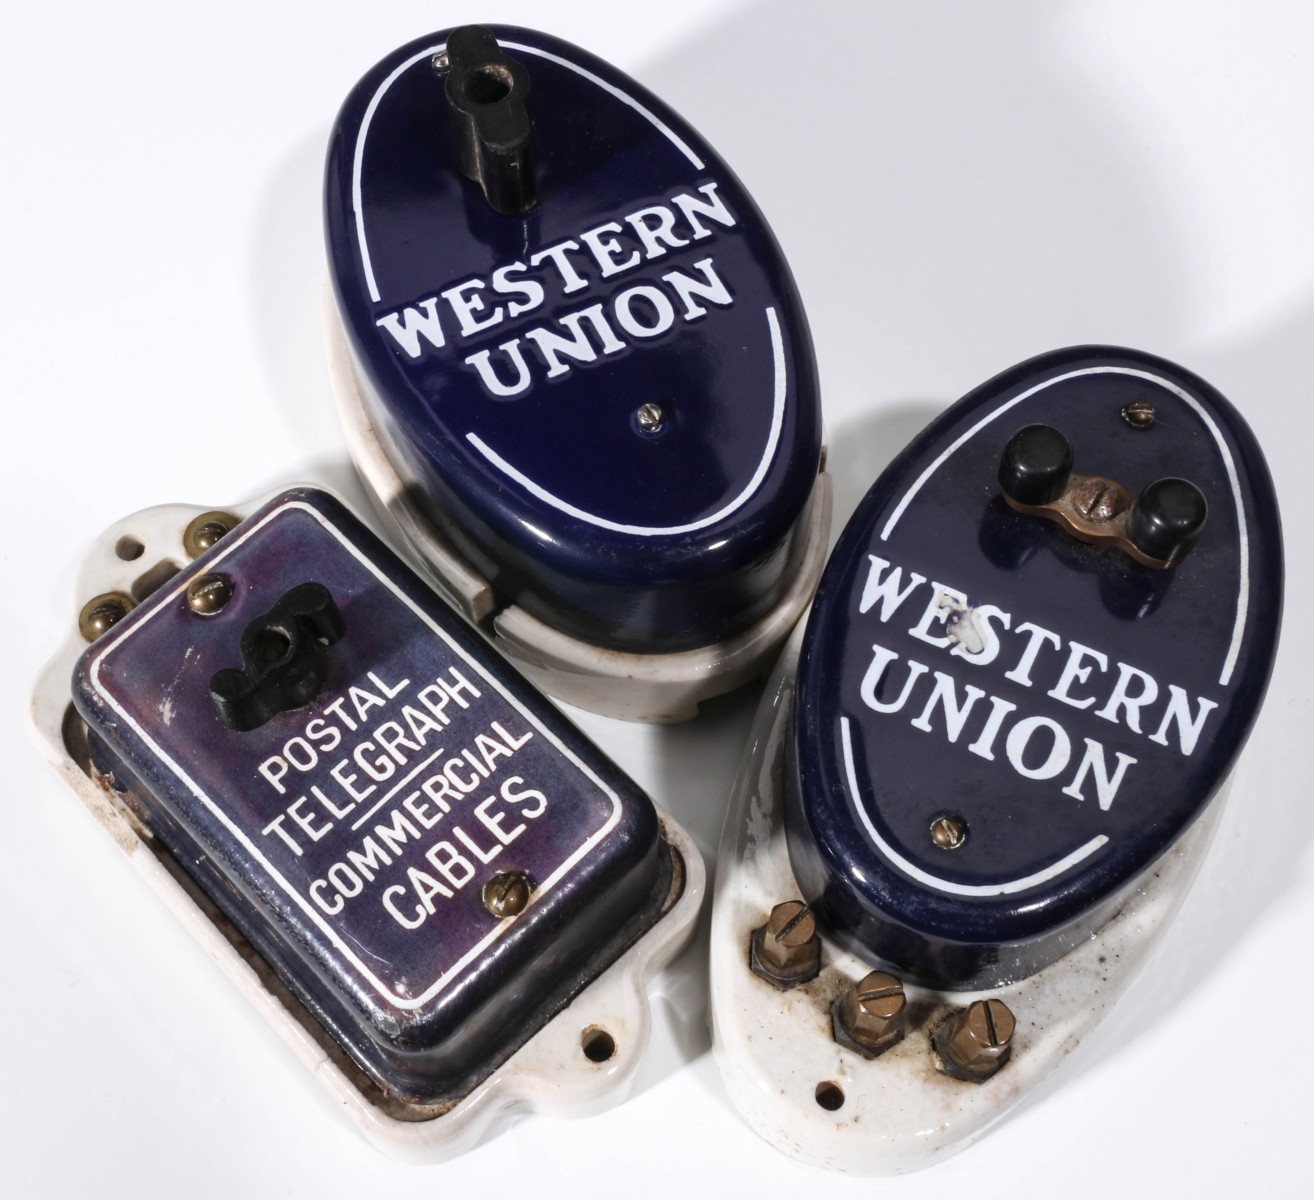 AN EARLY WESTERN UNION PORCELAIN SIGN WITH CALL BOXES